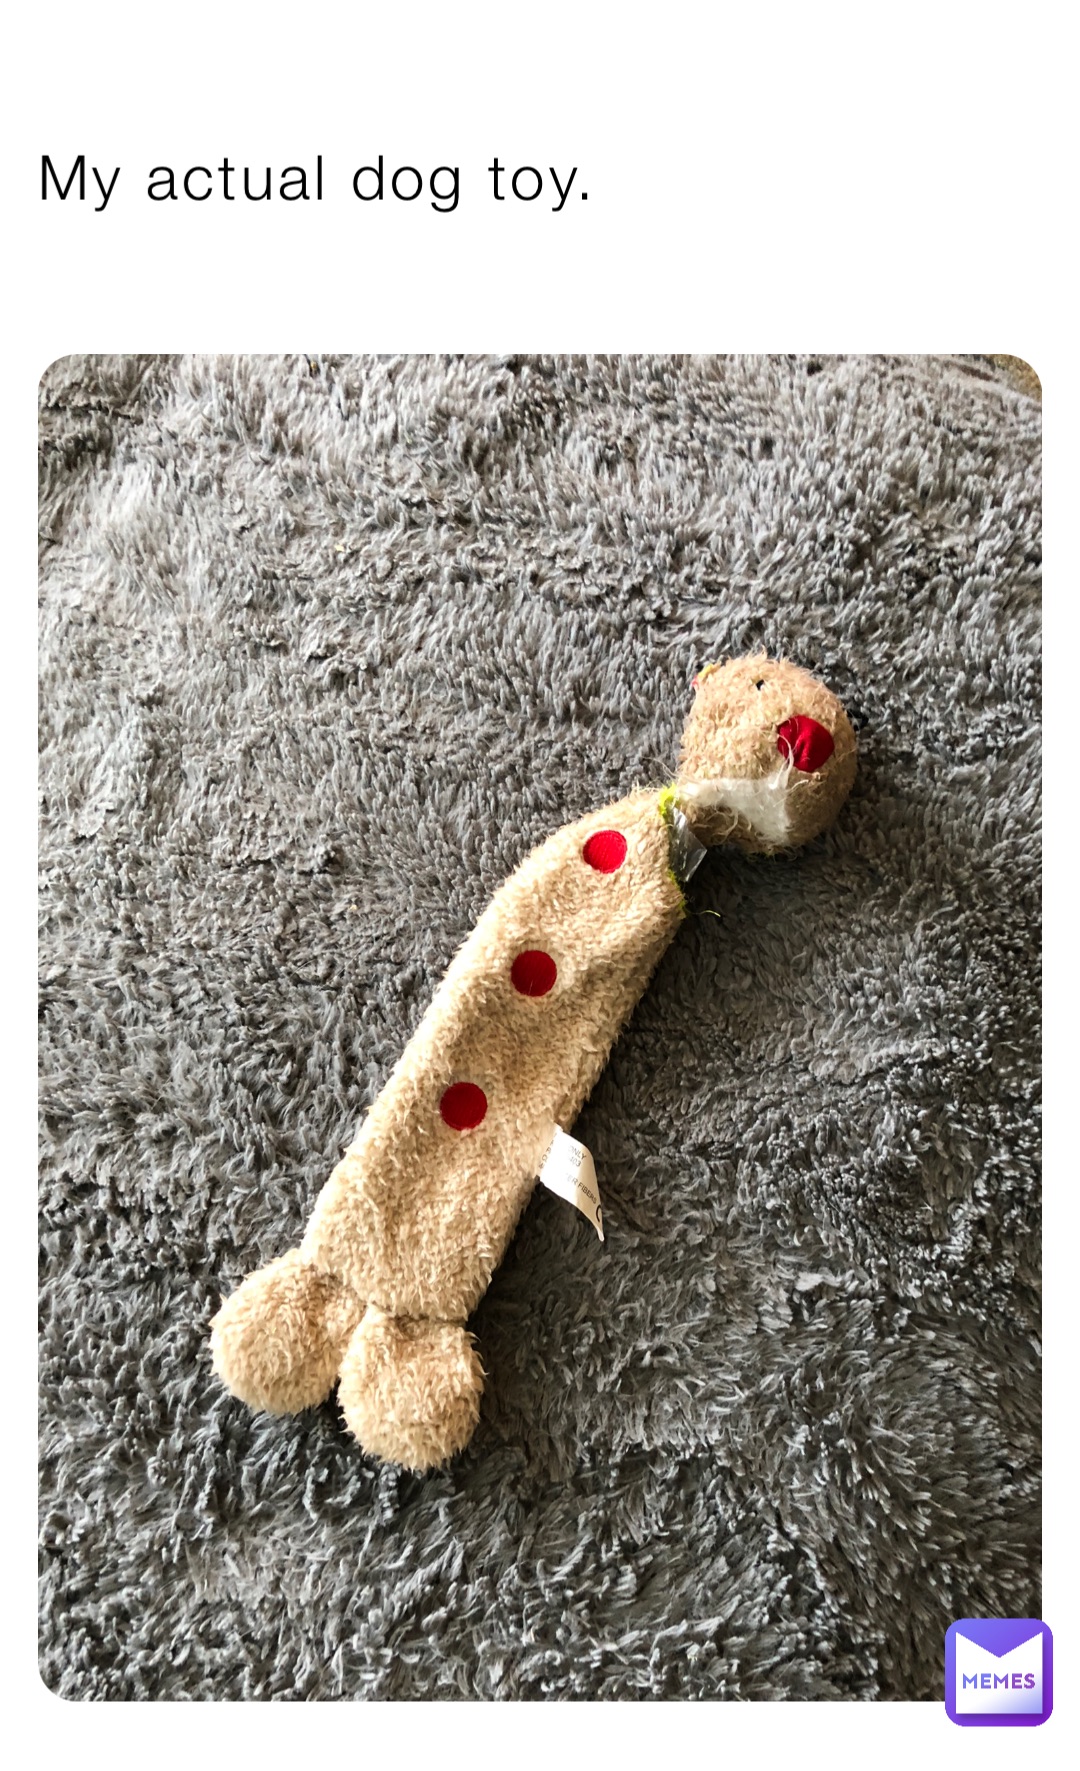 My actual dog toy.